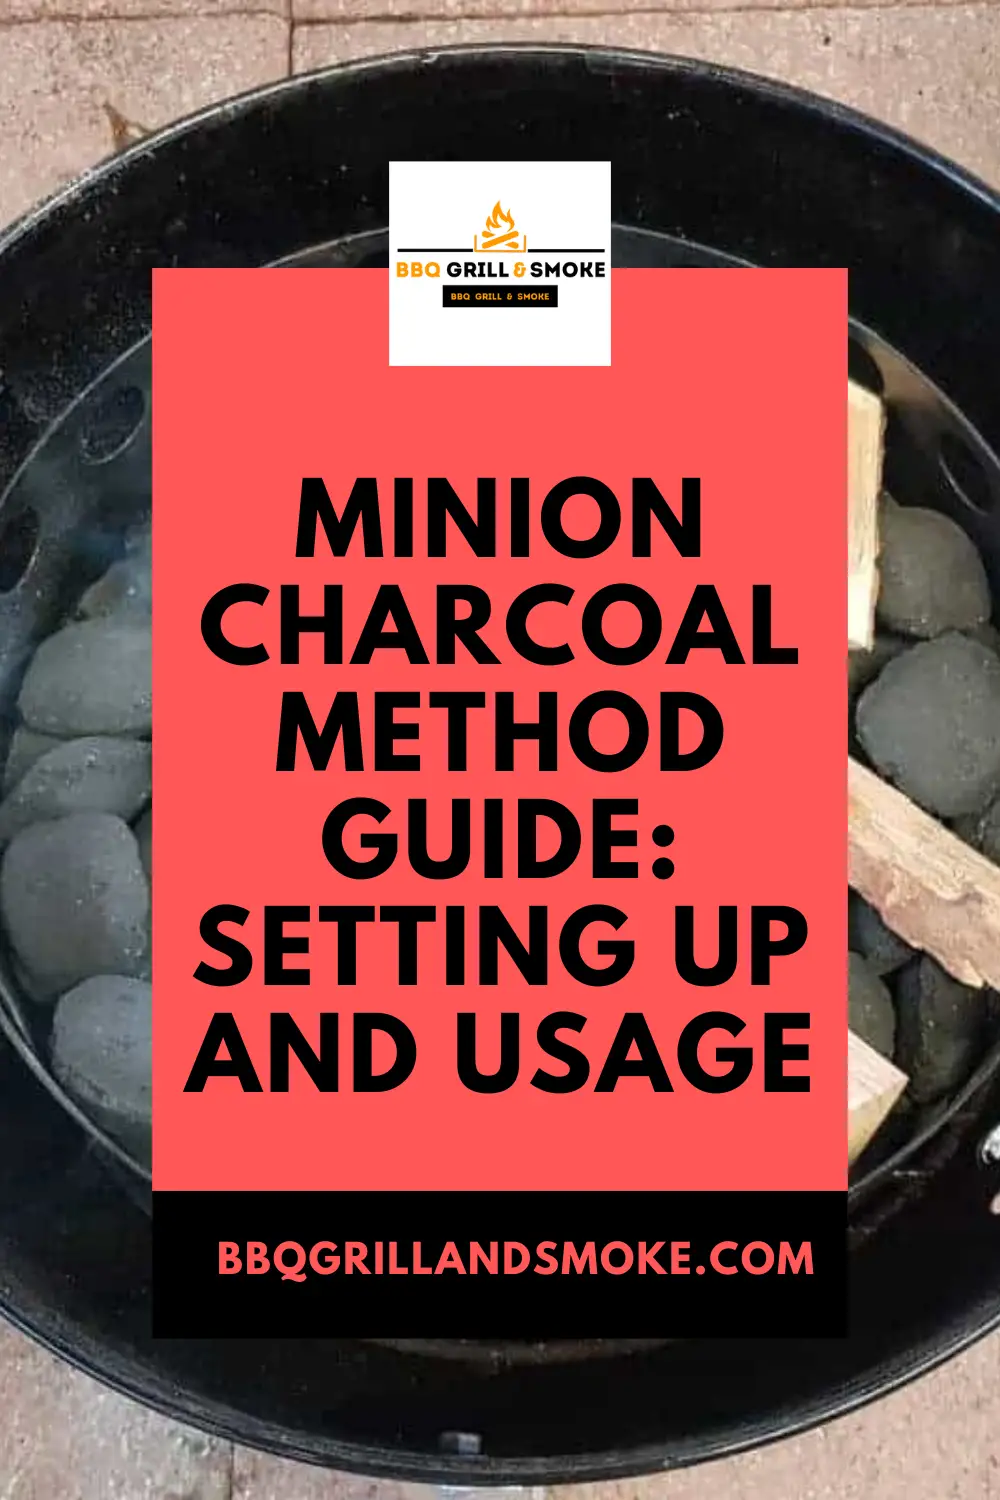 Minion Charcoal Method Guide Setting Up and Usage